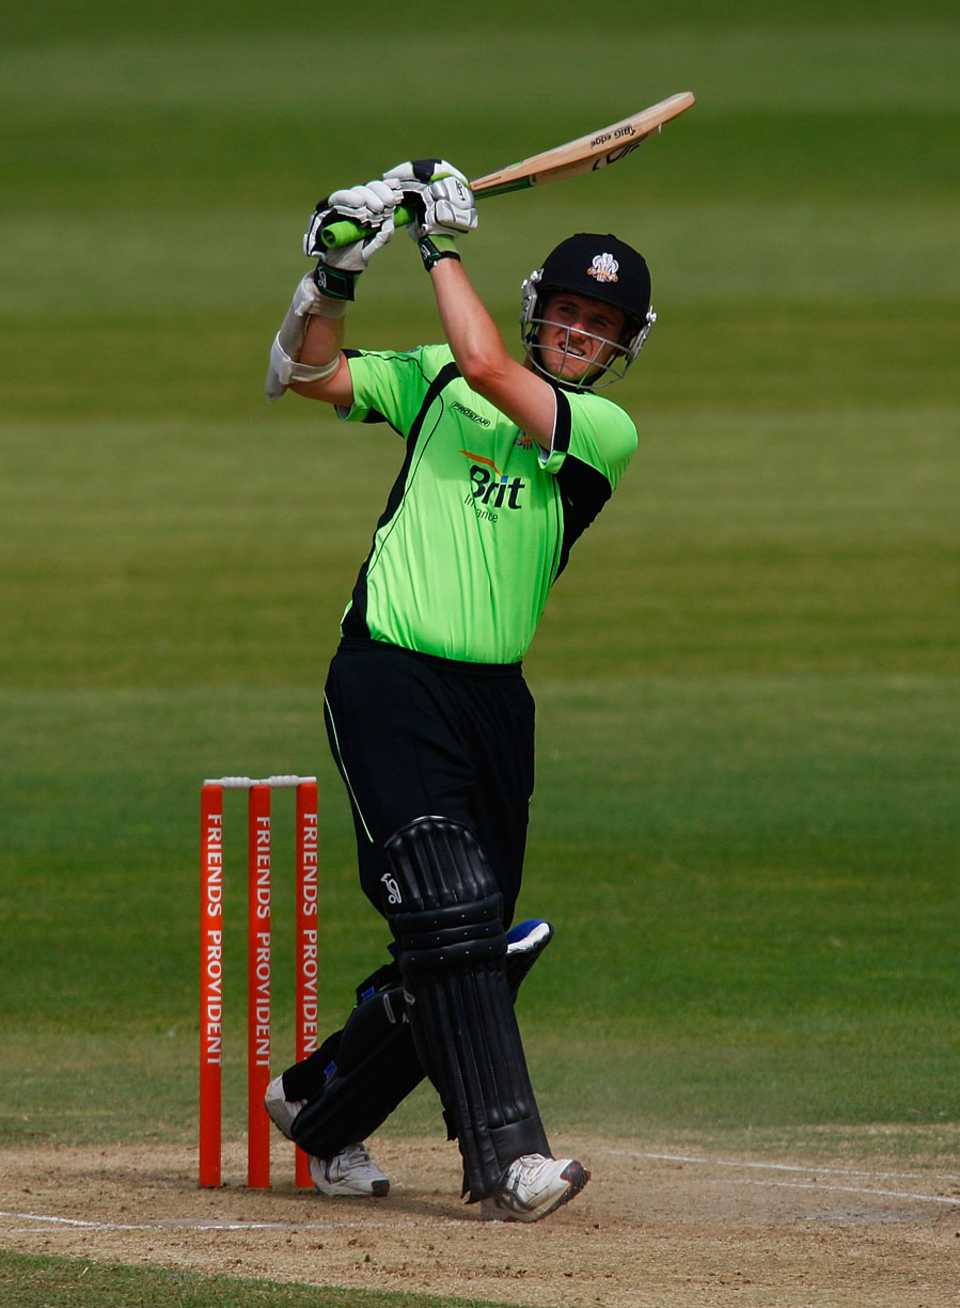 Steve Davies reached his fifty off 19 balls as he powered Surrey to victory